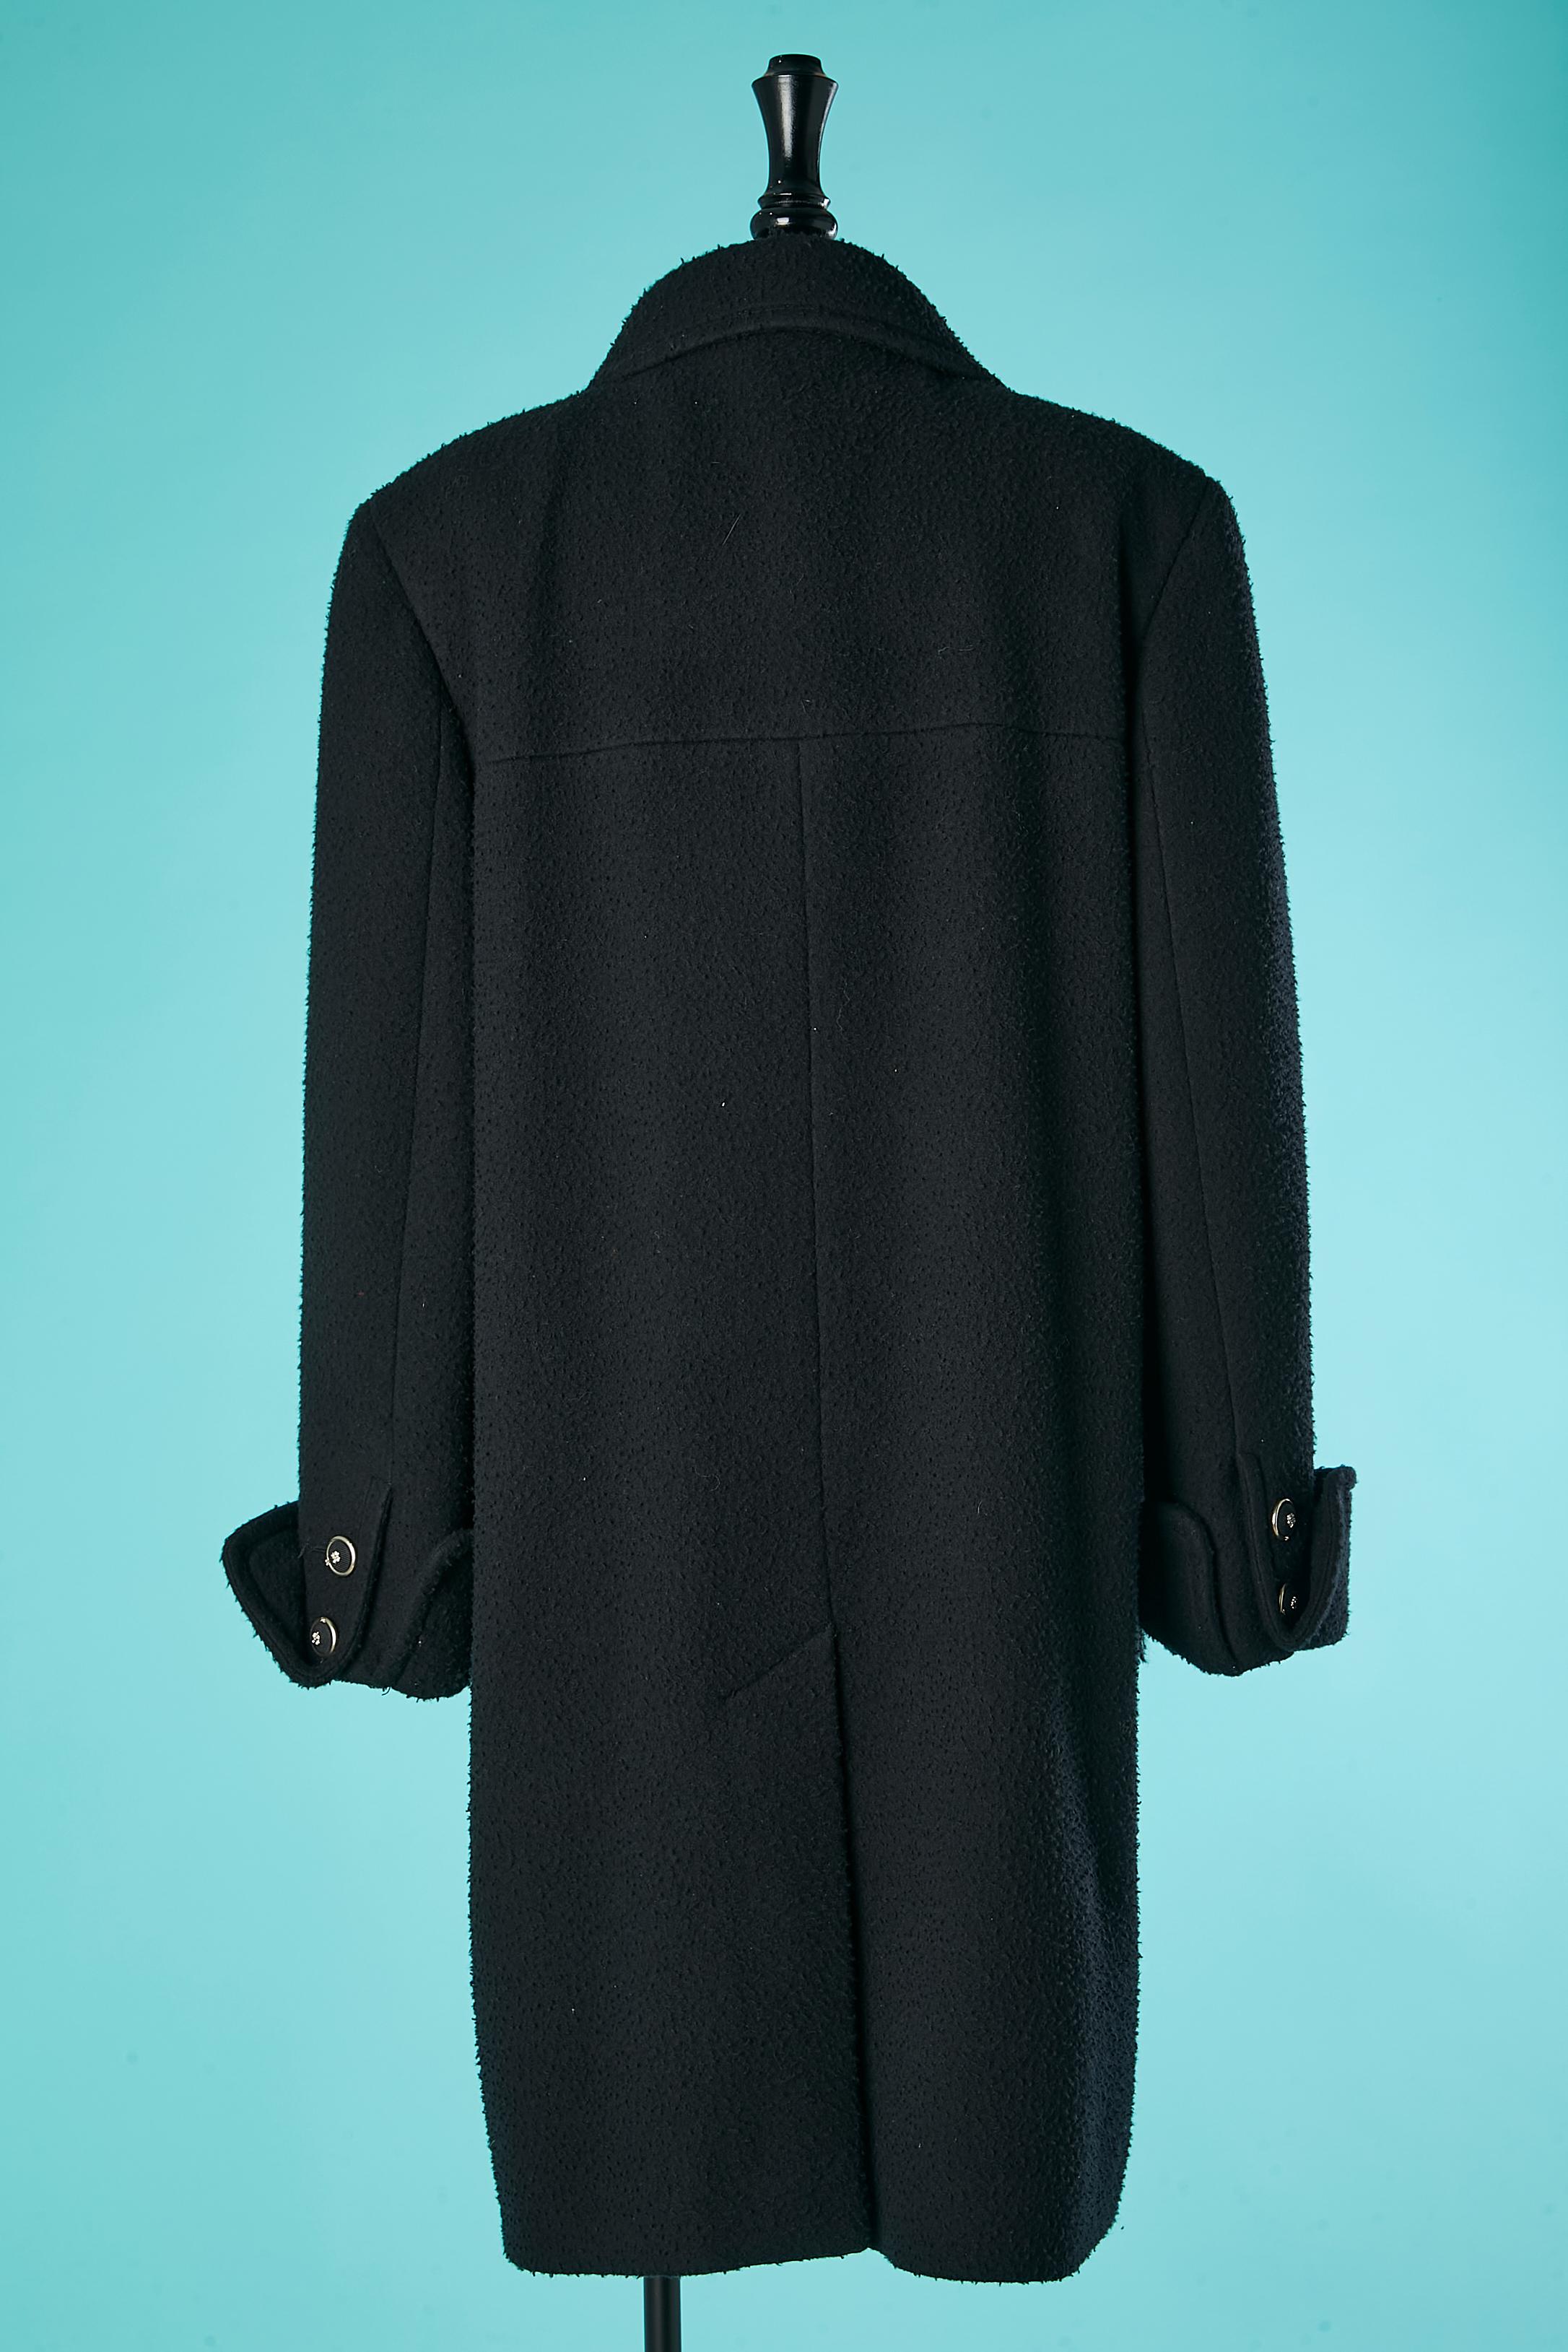 Black wool and cashmere double-breasted coat with embroideries on pockets Chanel For Sale 3